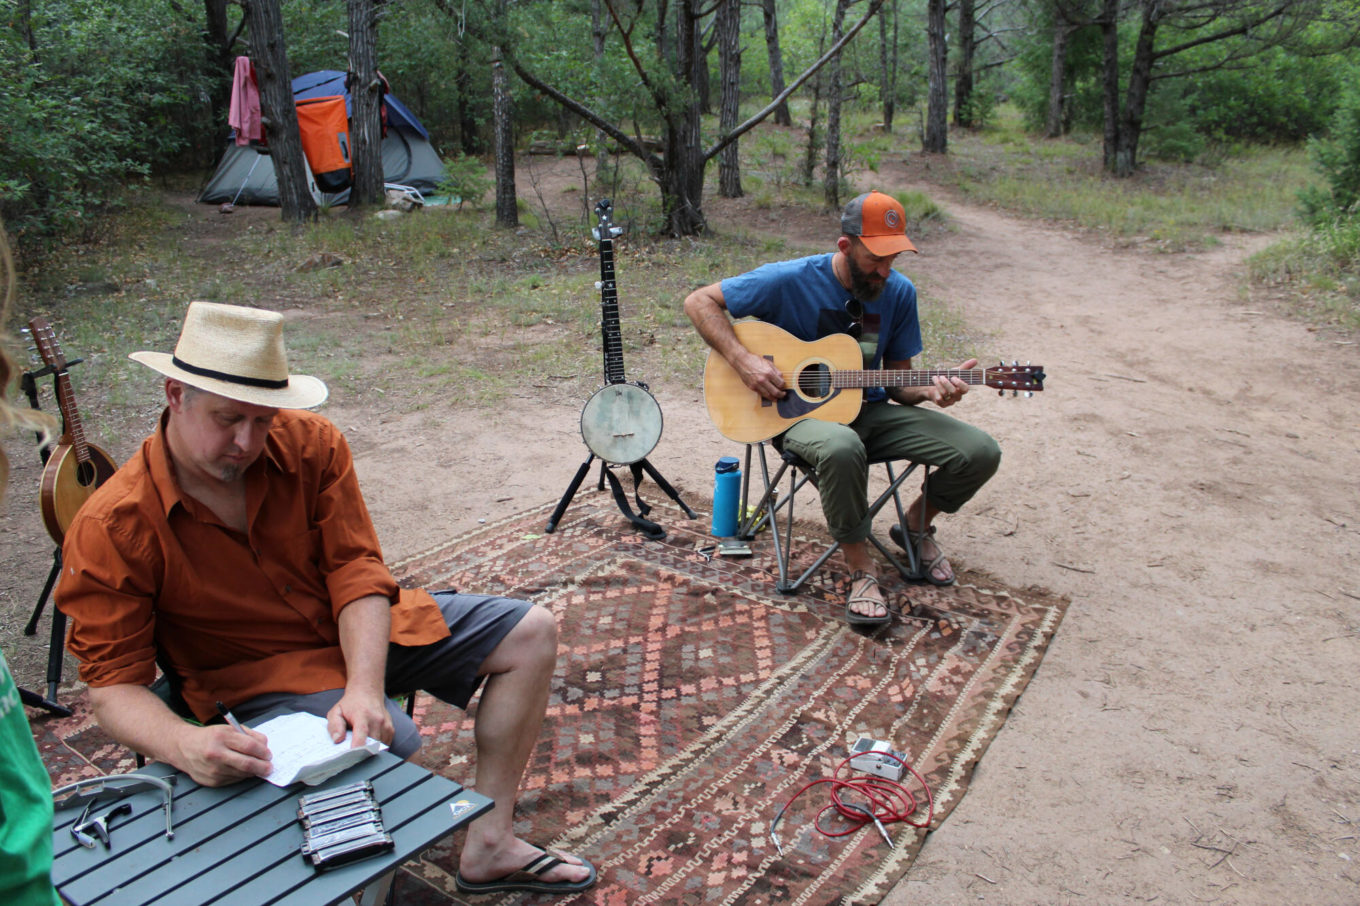 Music during the rio chama river trip